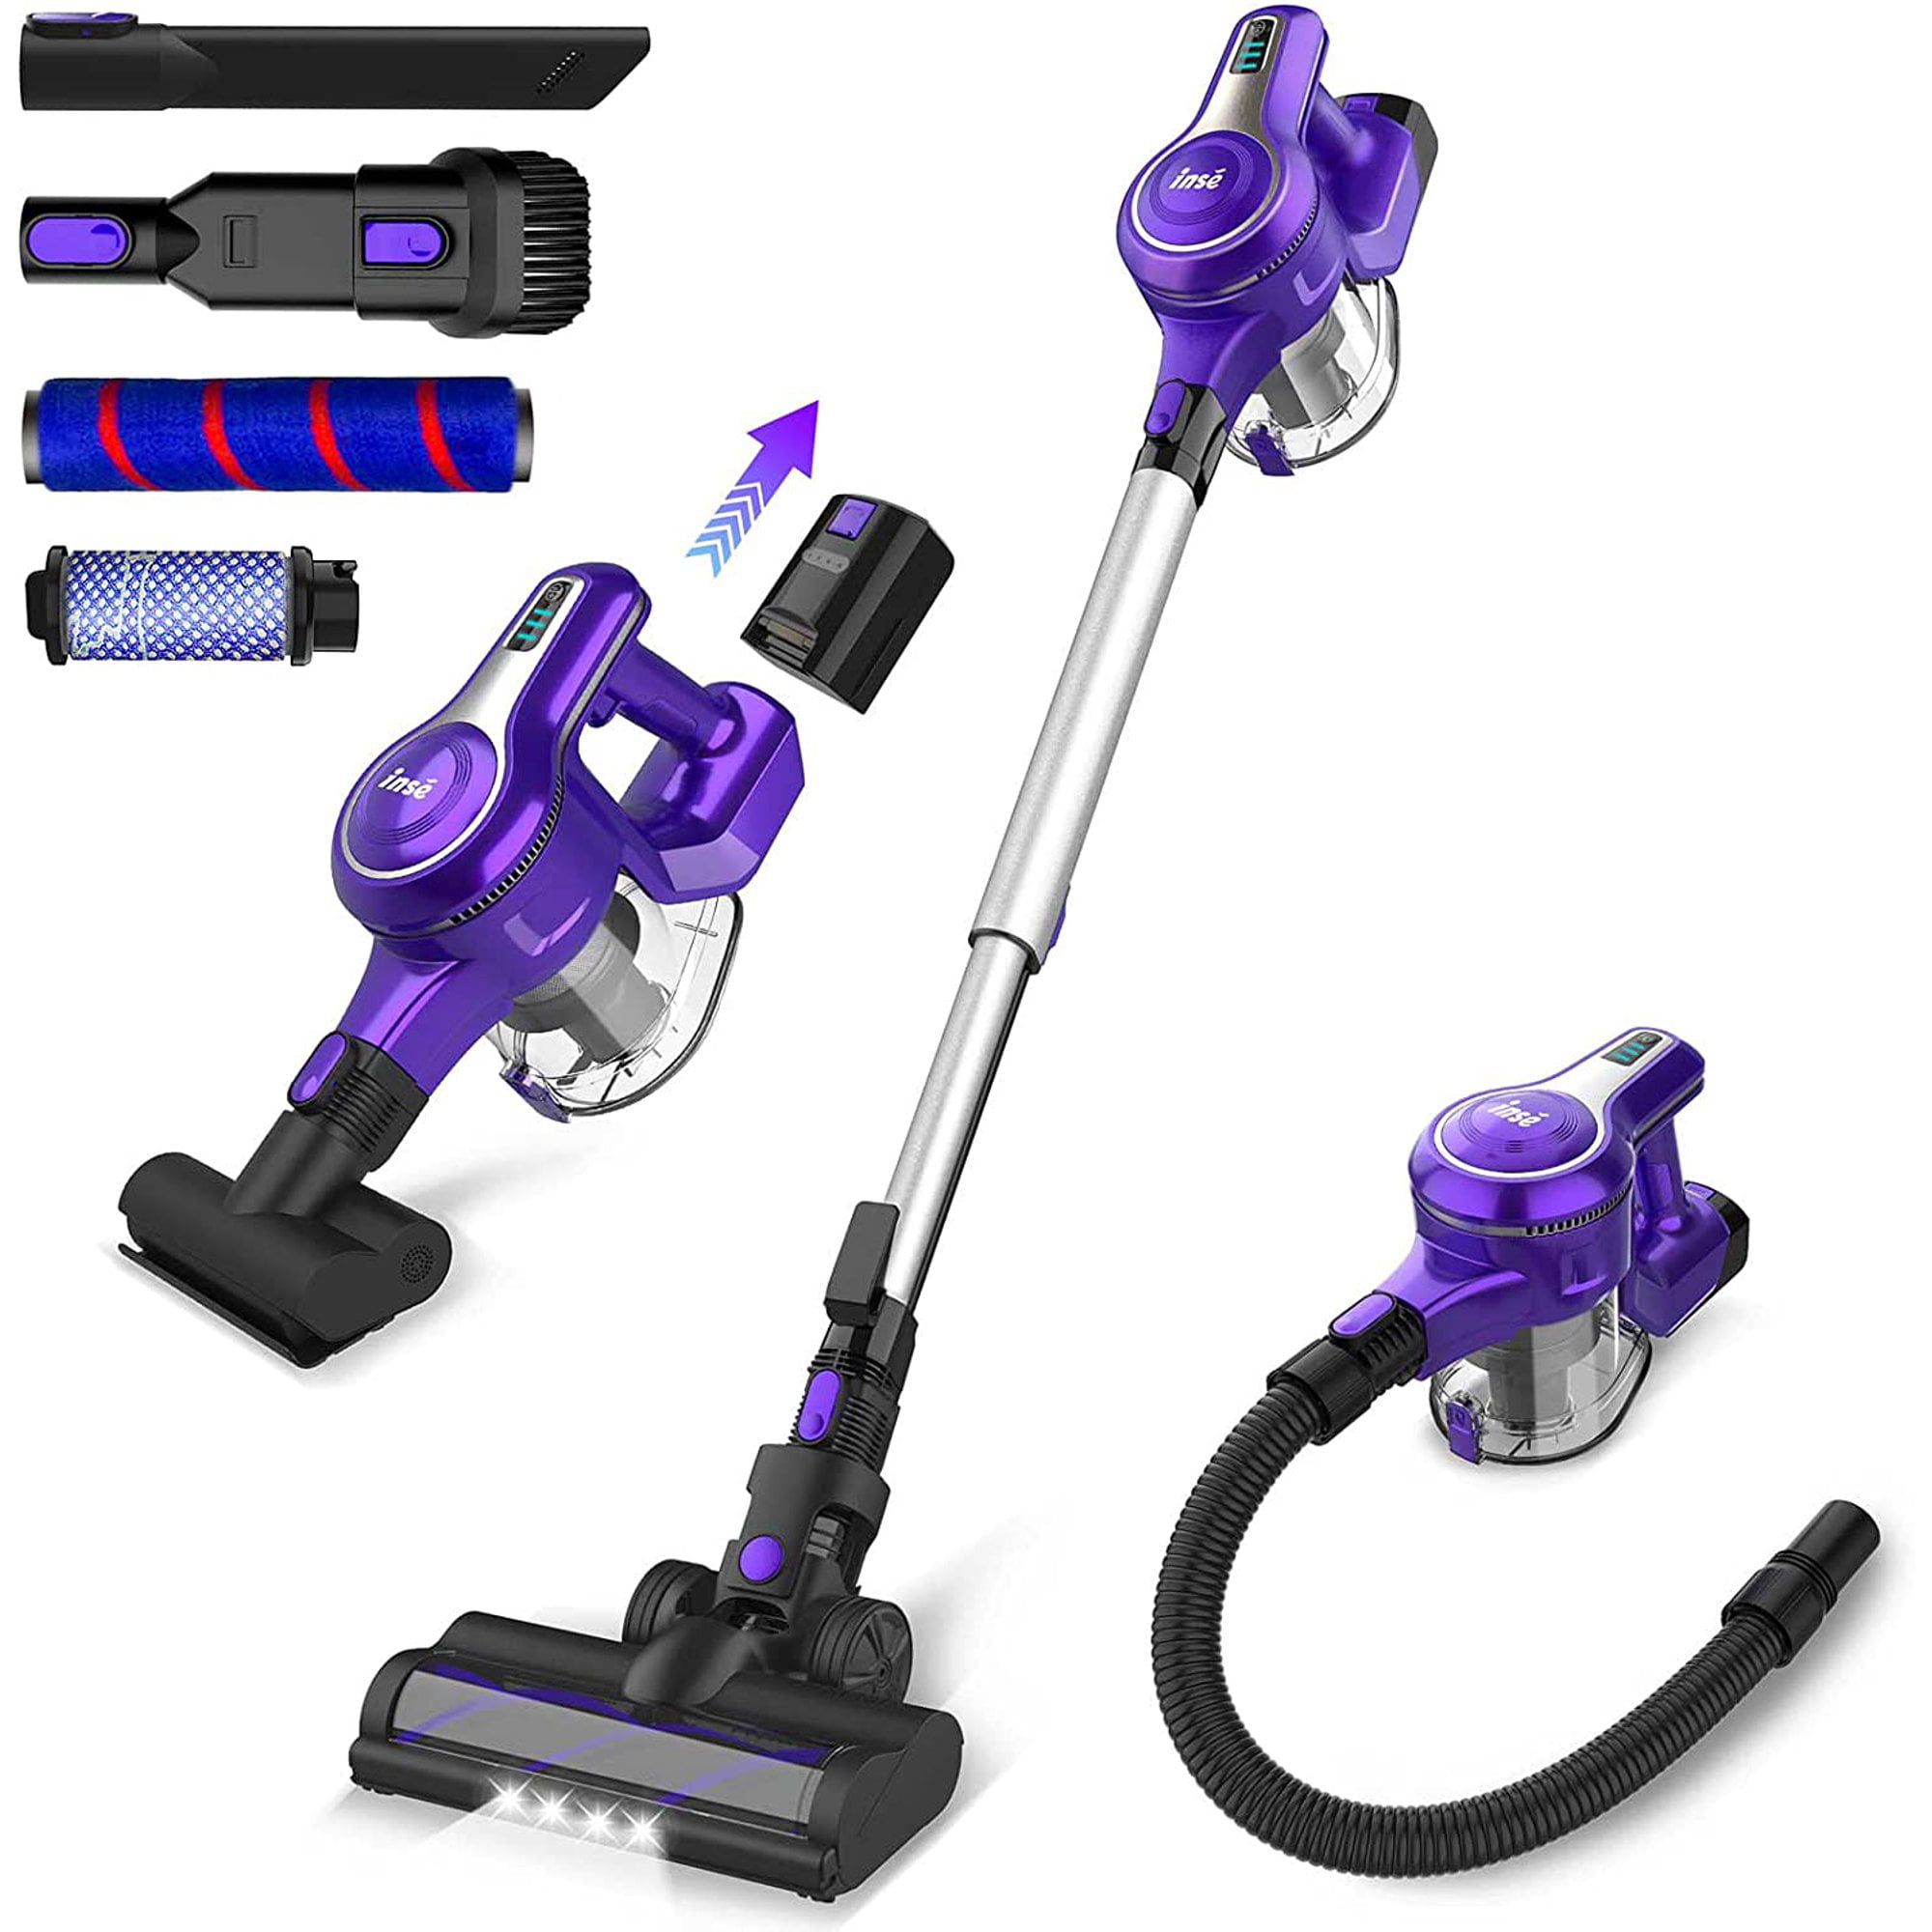 Blue S6 23Kpa 250W Powerful Suction Stick Vacuum 10-in-1 Lightweight Vacuum for Carpet Hard Floor Car Pet Hair INSE Cordless Vacuum Cleaner Up to 45 Mins Max Runtime 2500mAh Rechargeable Battery 